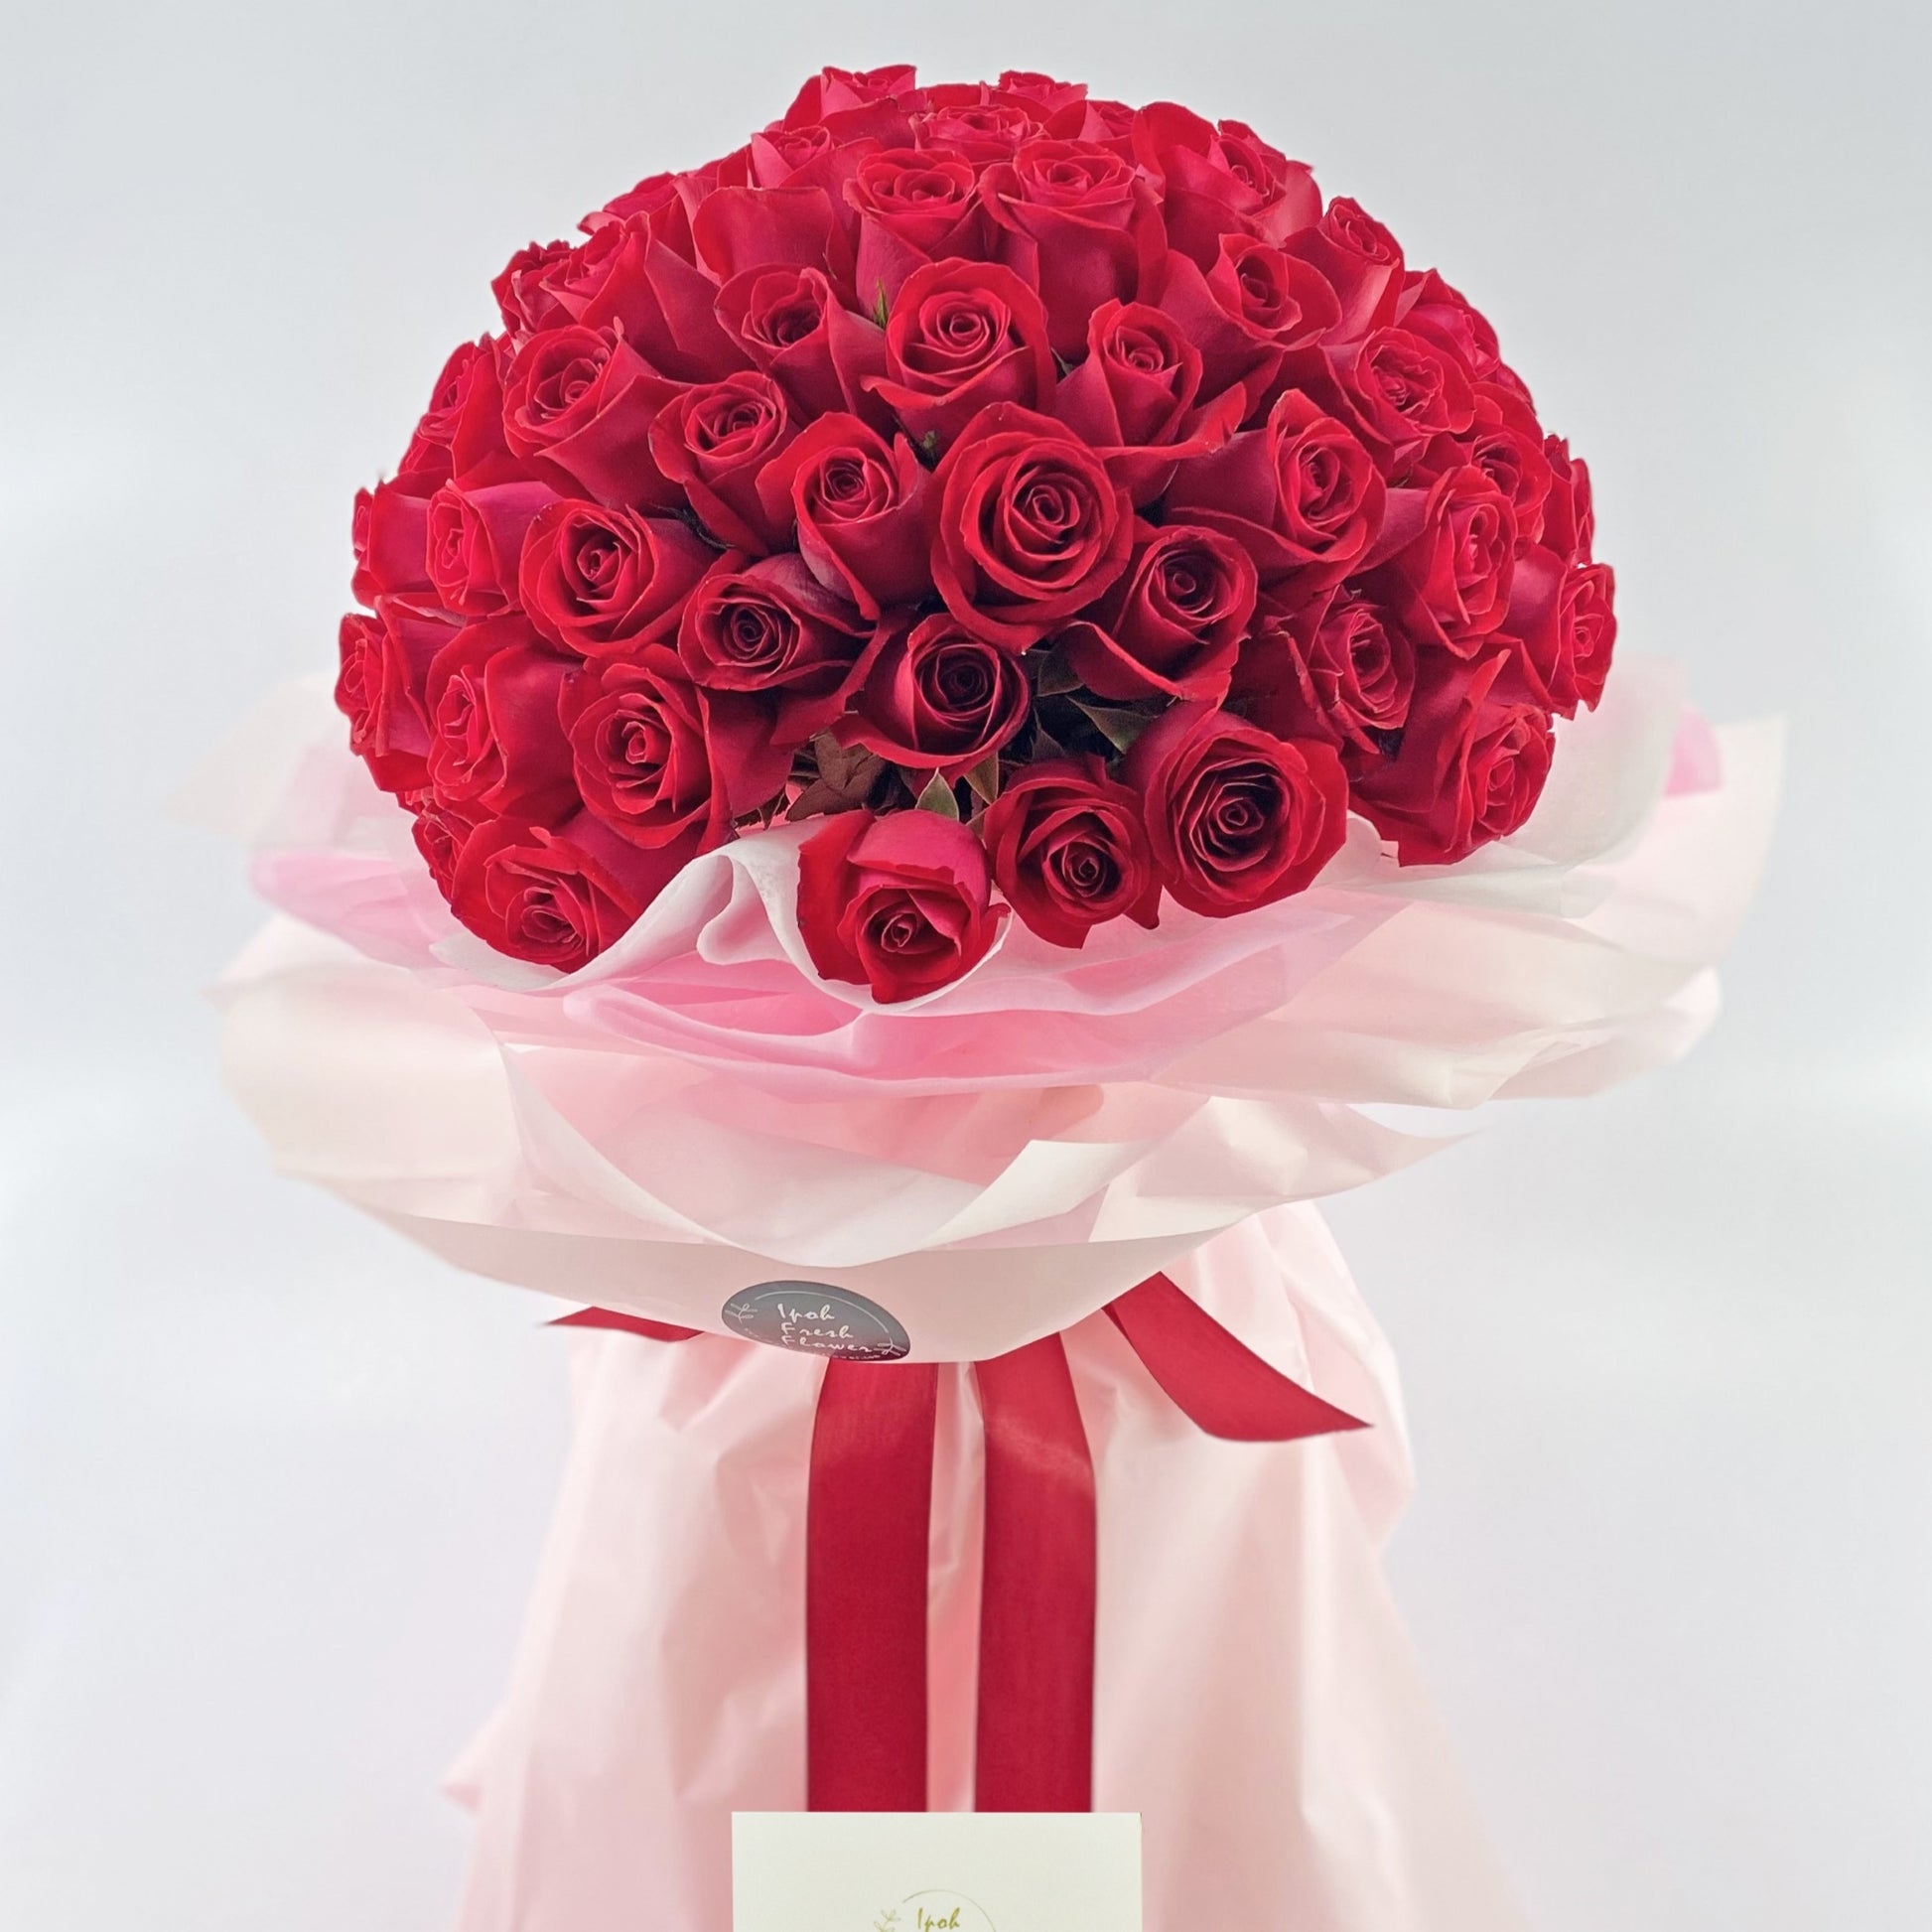 Apple Of My Eye- 99 Roses Bouquet| Premium Fresh Flowers Delivery